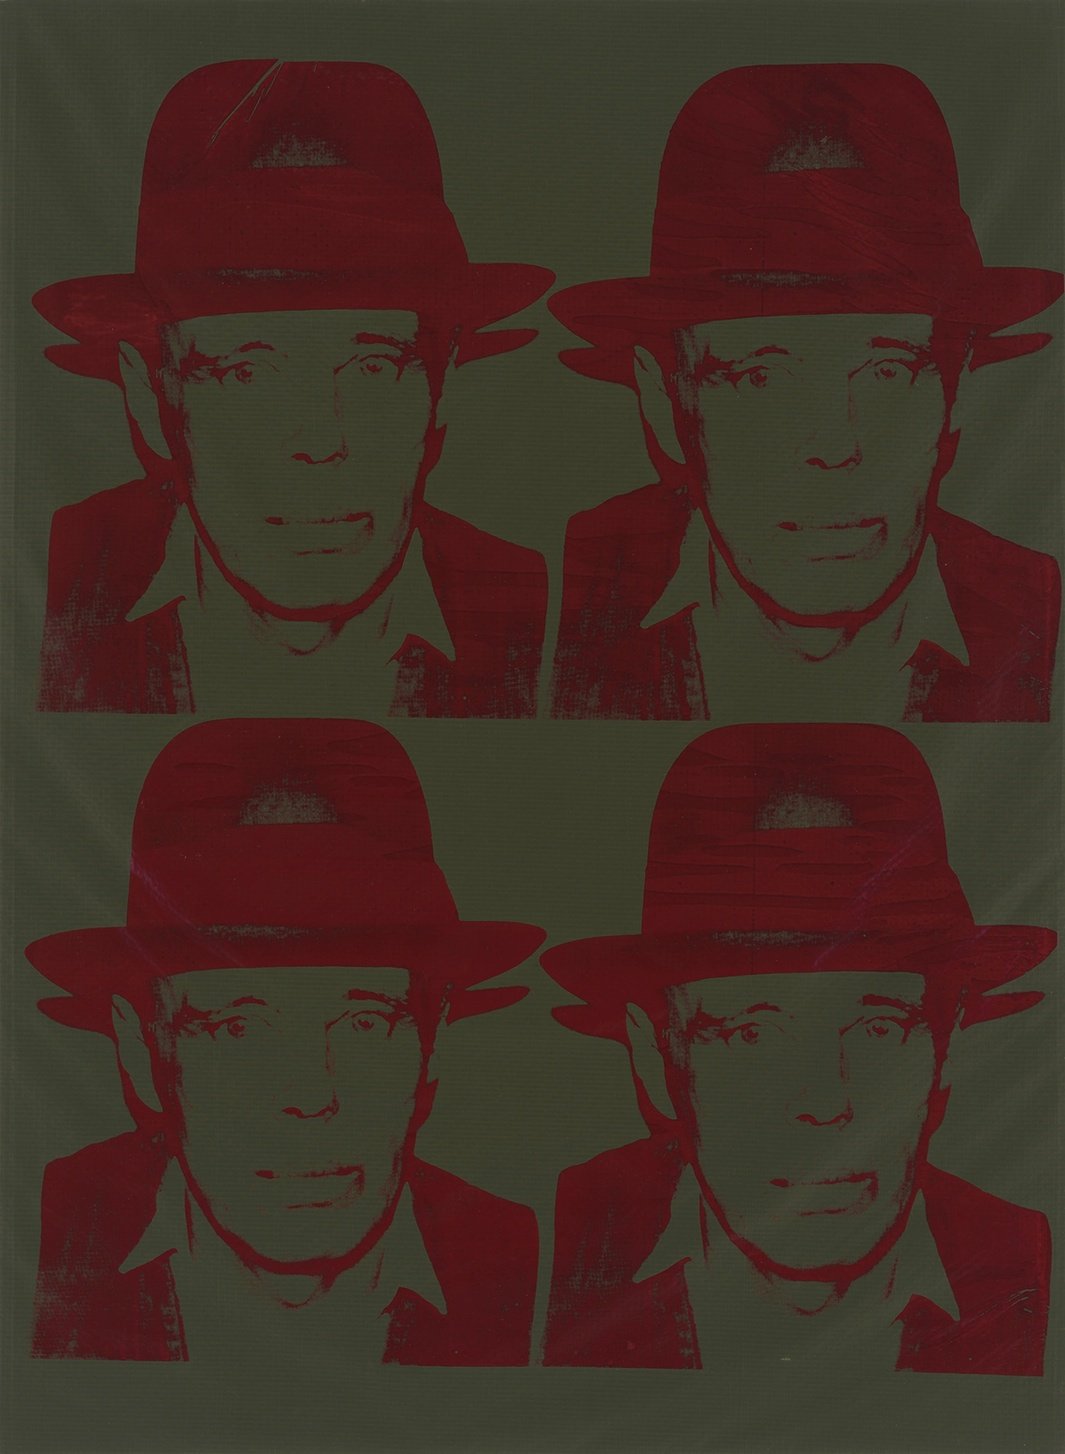 Andy Warhol, Joseph Beuys, (1981). Photo: The Andy Warhol Foundation for the Visual Arts Inc.; the Artists Rights Society, New York; DACS London.